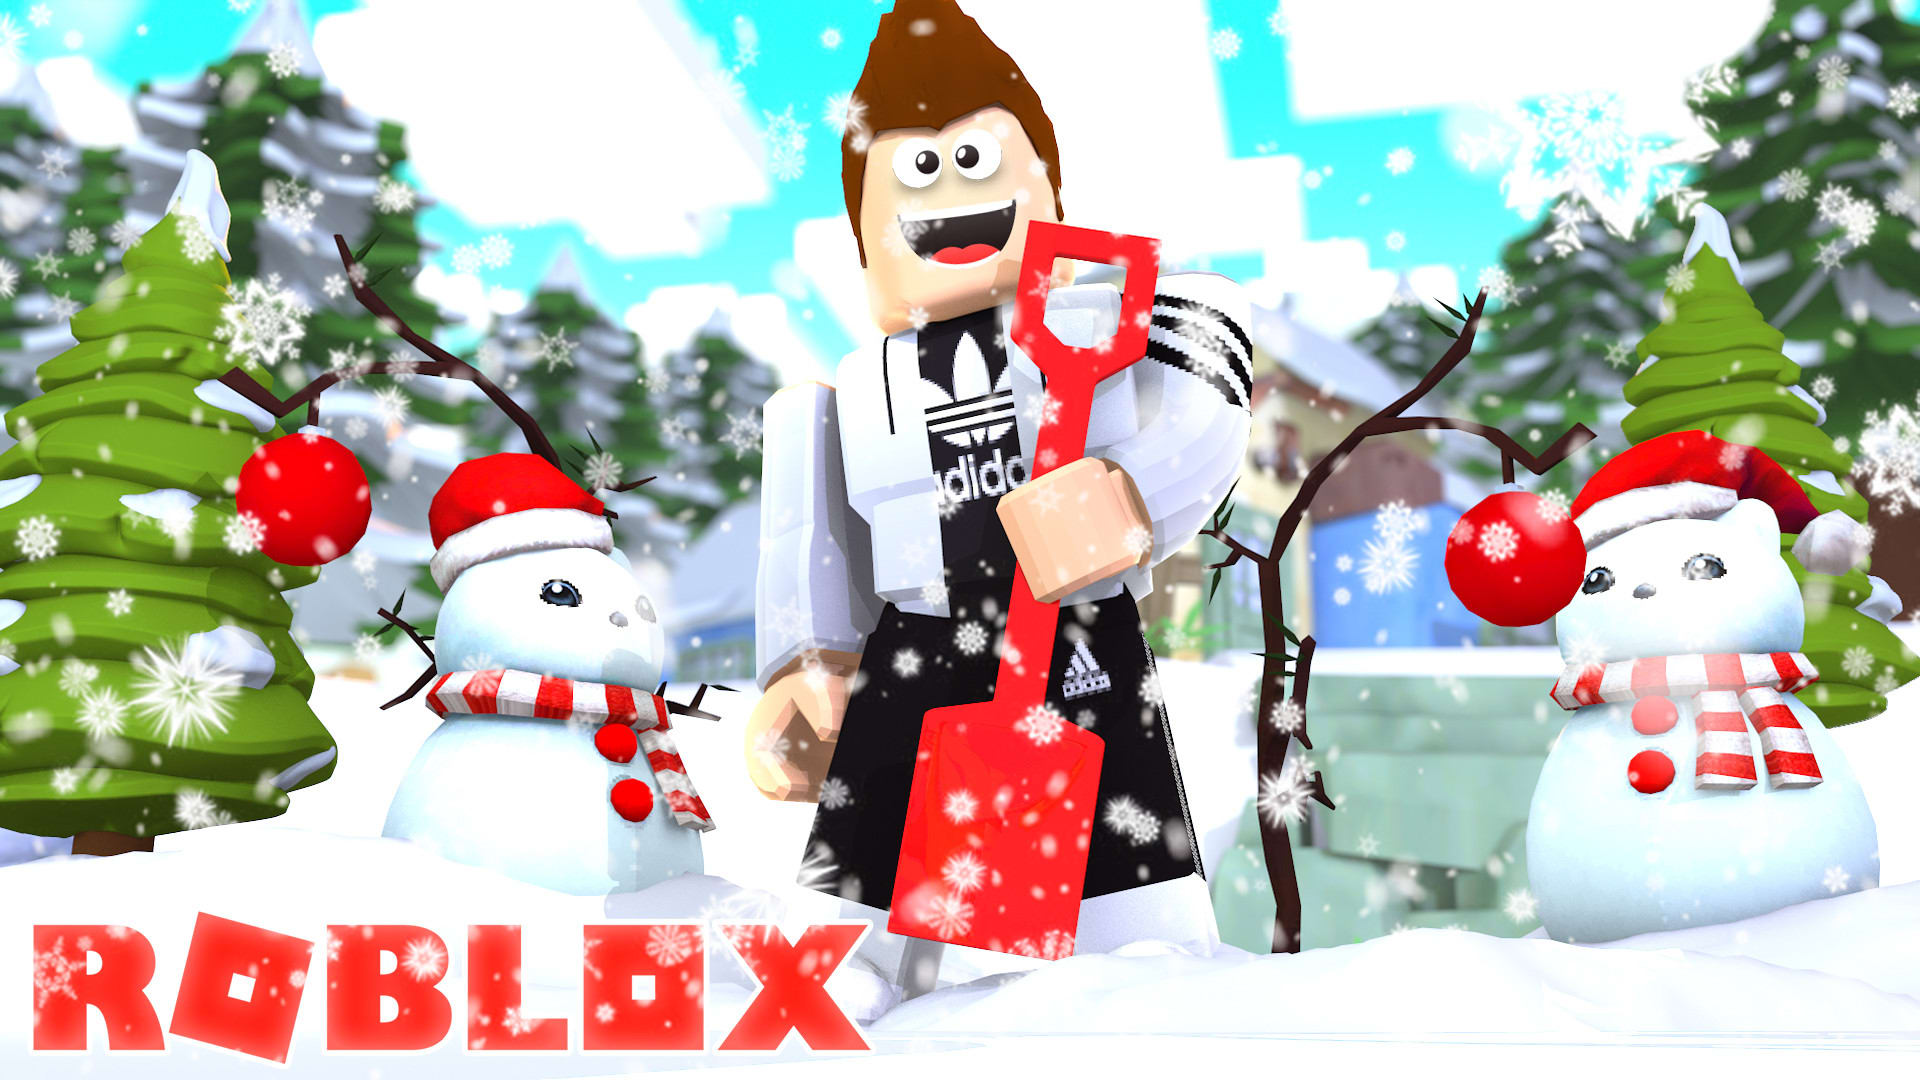 Make You A Custom Roblox Thumbnail By Jackxwhalen - knchim i will make you a roblox thumbnail picture for 5 on wwwfiverrcom